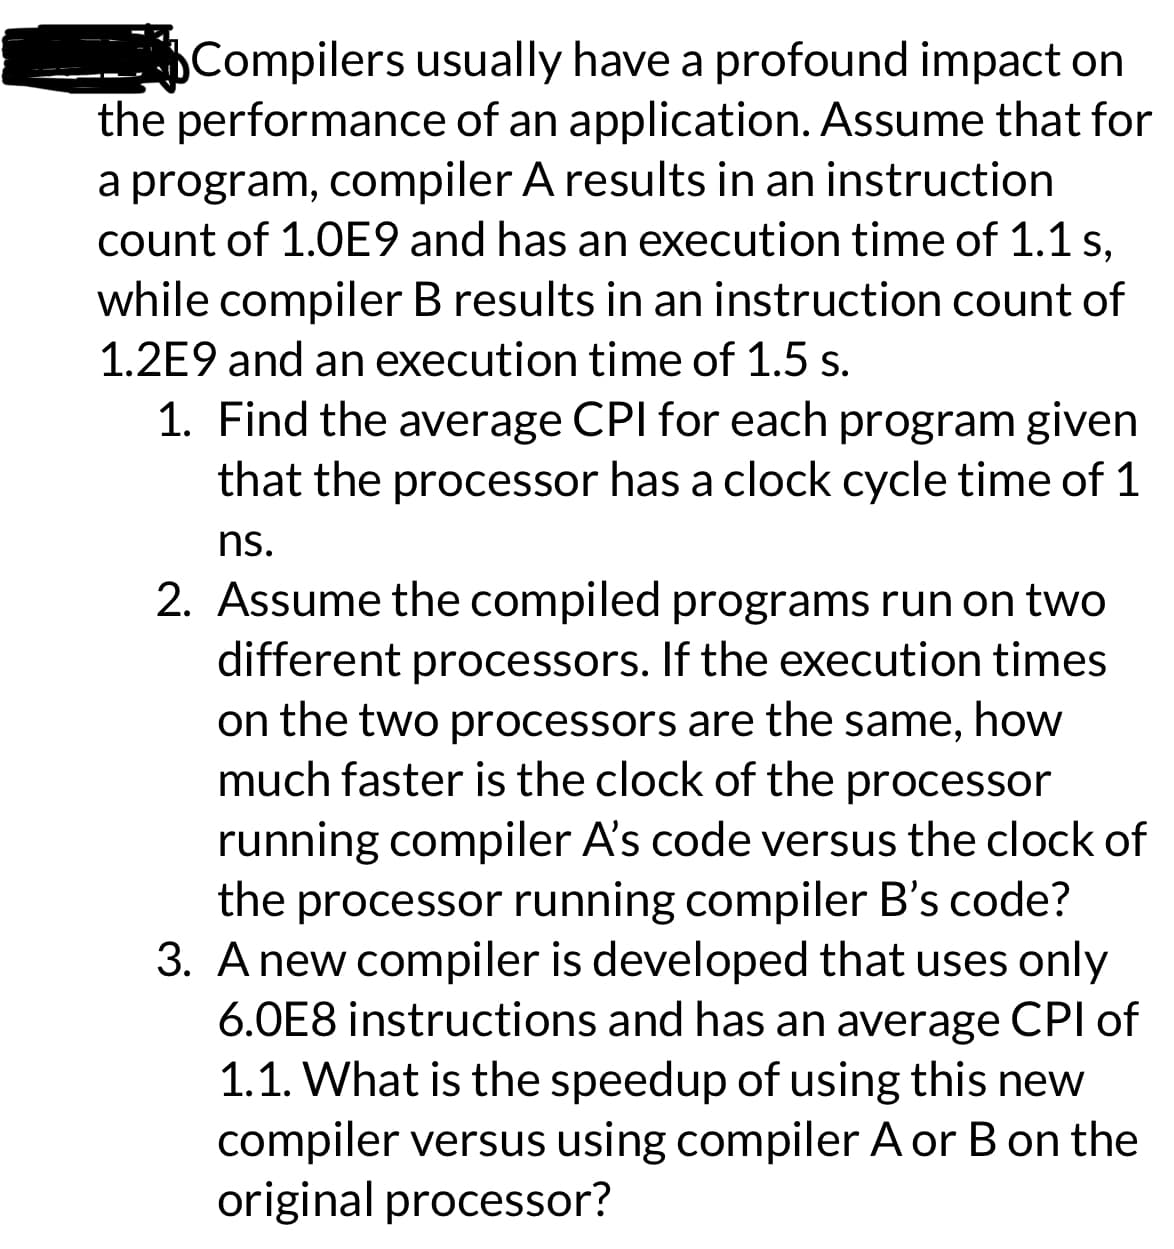 Compilers usually have a profound impact on
the performance of an application. Assume that for
a program, compiler A results in an instruction
count of 1.0E9 and has an execution time of 1.1 s,
while compiler B results in an instruction count of
1.2E9 and an execution time of 1.5 s.
1. Find the average CPI for each program given
that the processor has a clock cycle time of 1
ns.
2. Assume the compiled programs run on two
different processors. If the execution times
on the two processors are the same, how
much faster is the clock of the processor
running compiler A's code versus the clock of
the processor running compiler B's code?
3. A new compiler is developed that uses only
6.0E8 instructions and has an average CPI of
1.1. What is the speedup of using this new
compiler versus using compiler A or B on the
original processor?